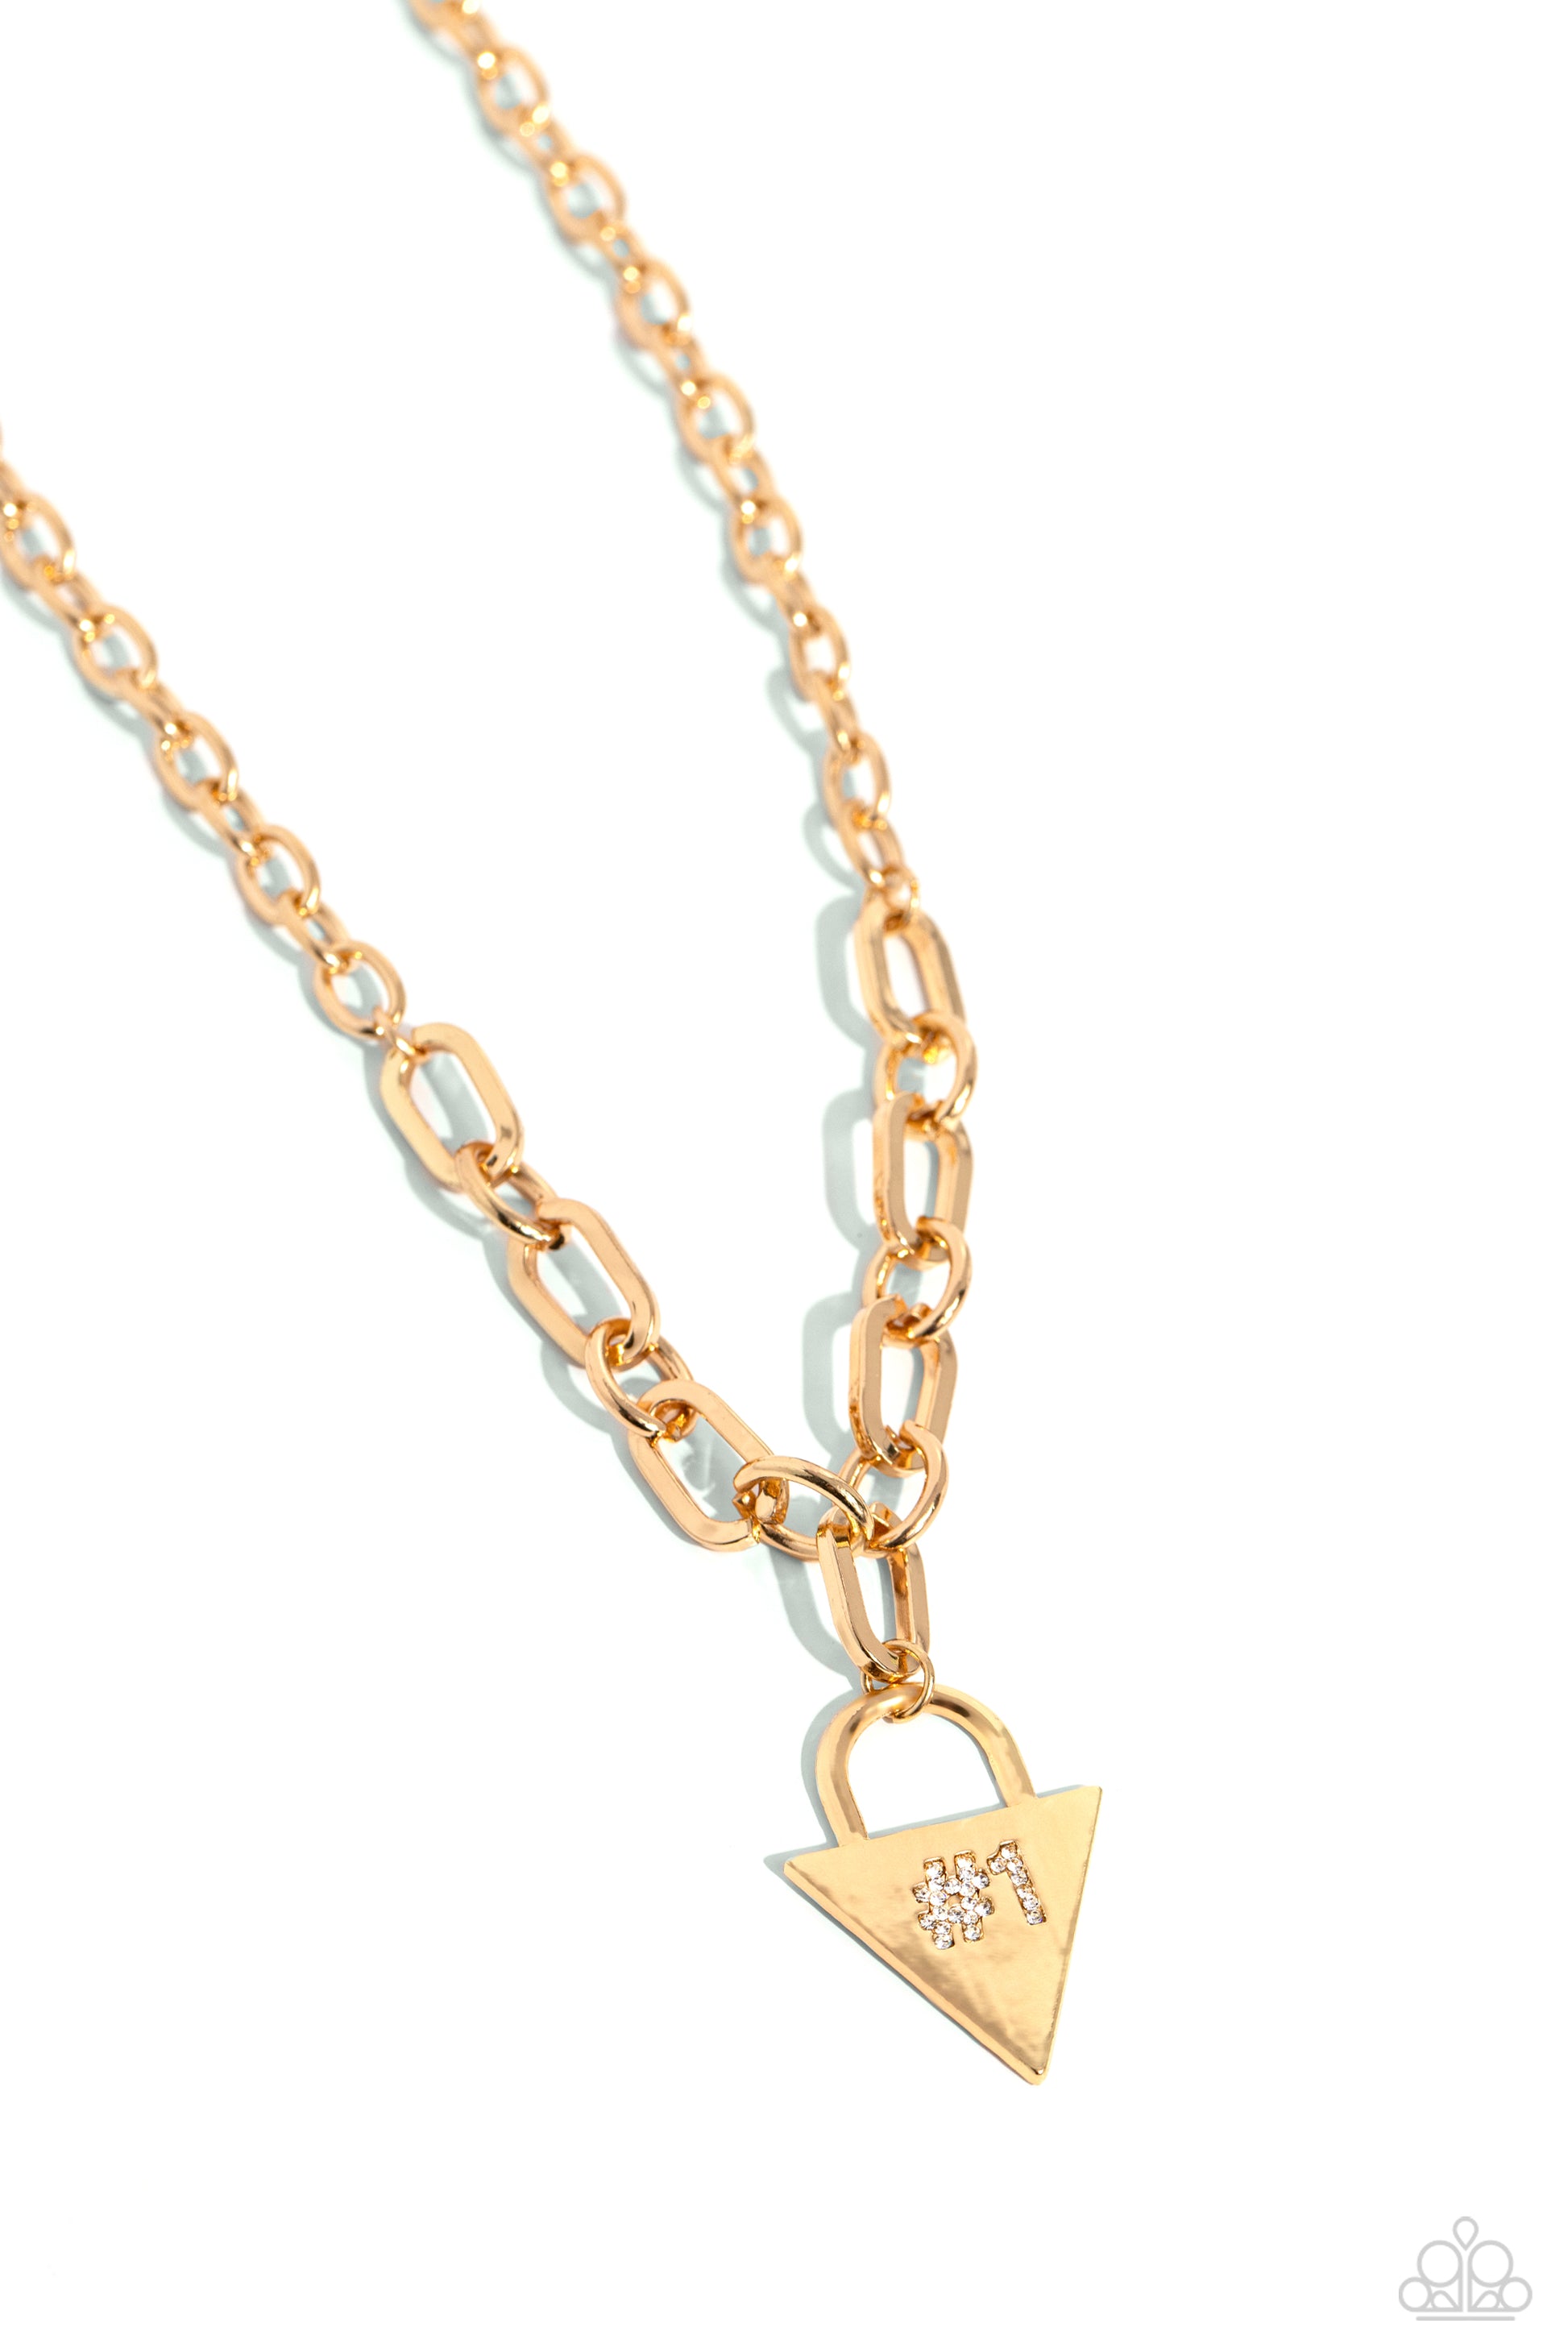 Your Number One Follower - gold - Paparazzi necklace